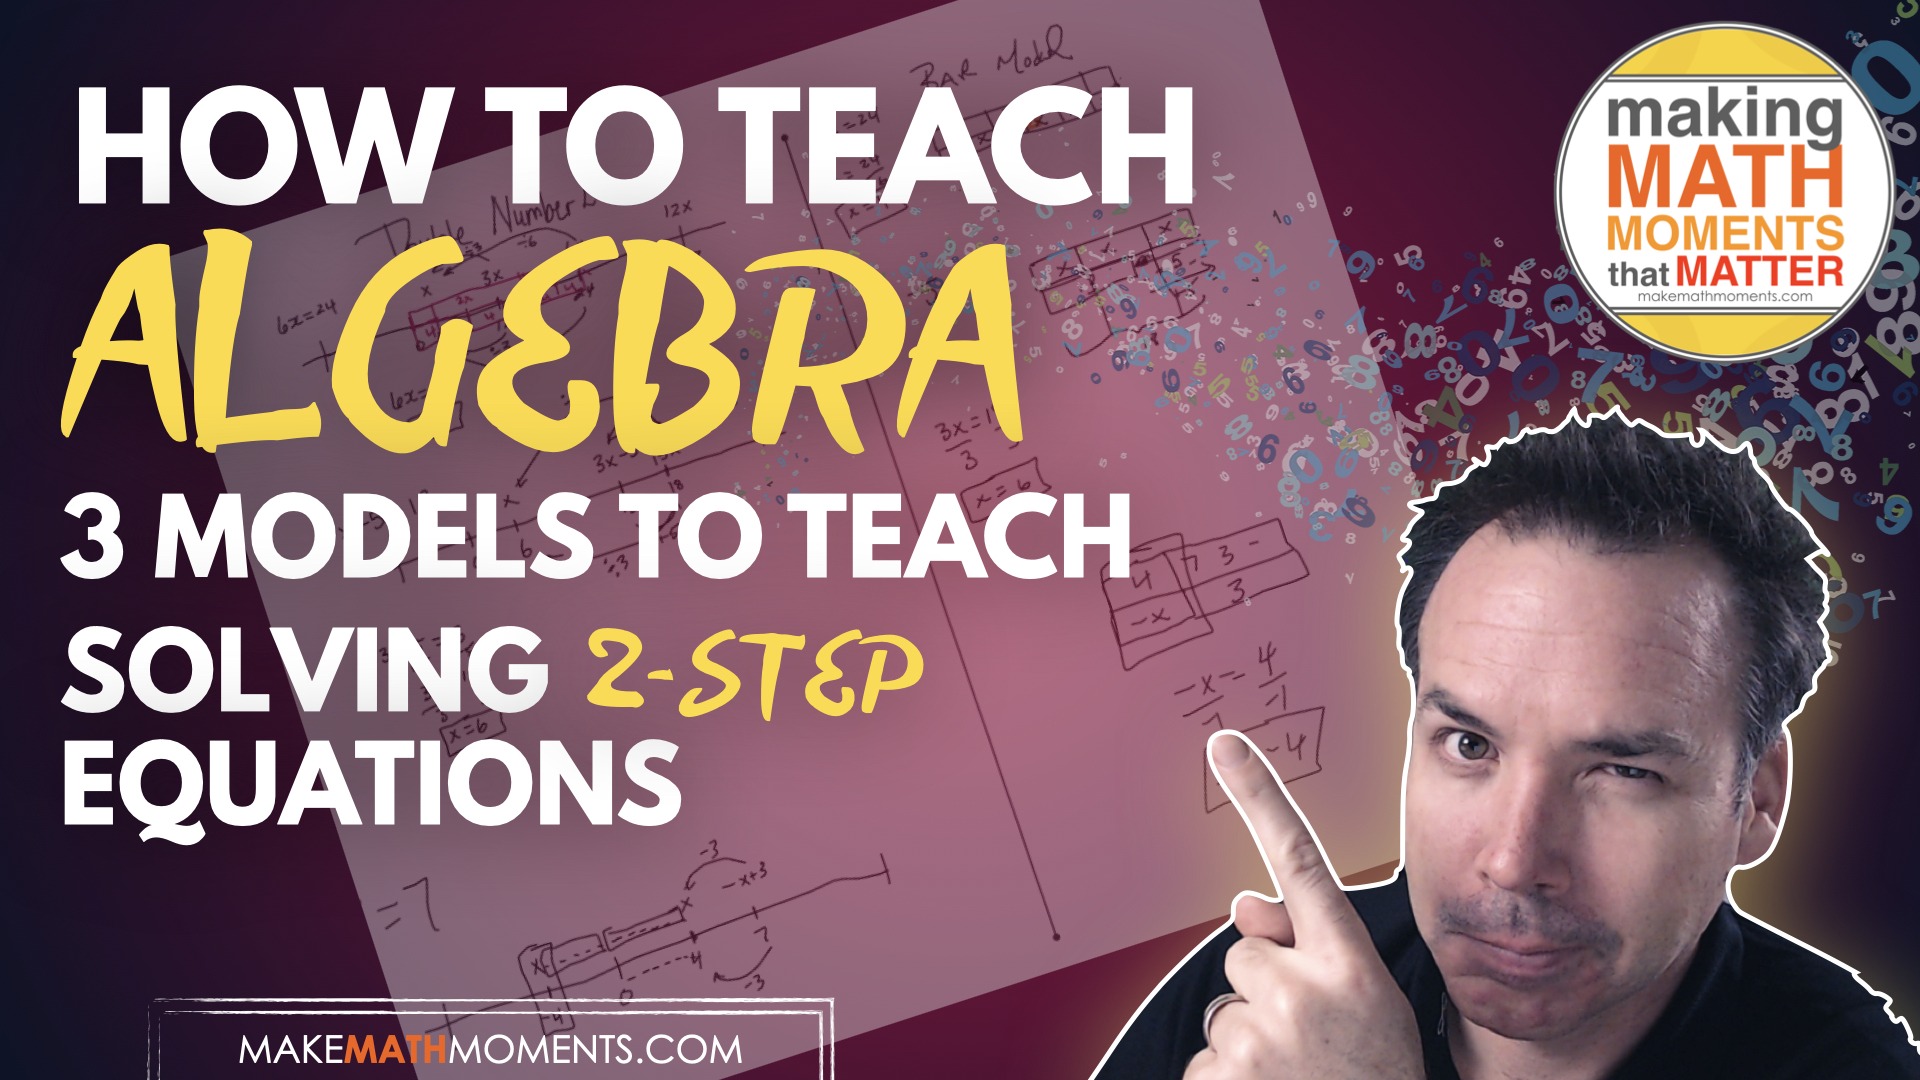 How To Teach Algebra: 3 Models For Solving 2-Step Equations